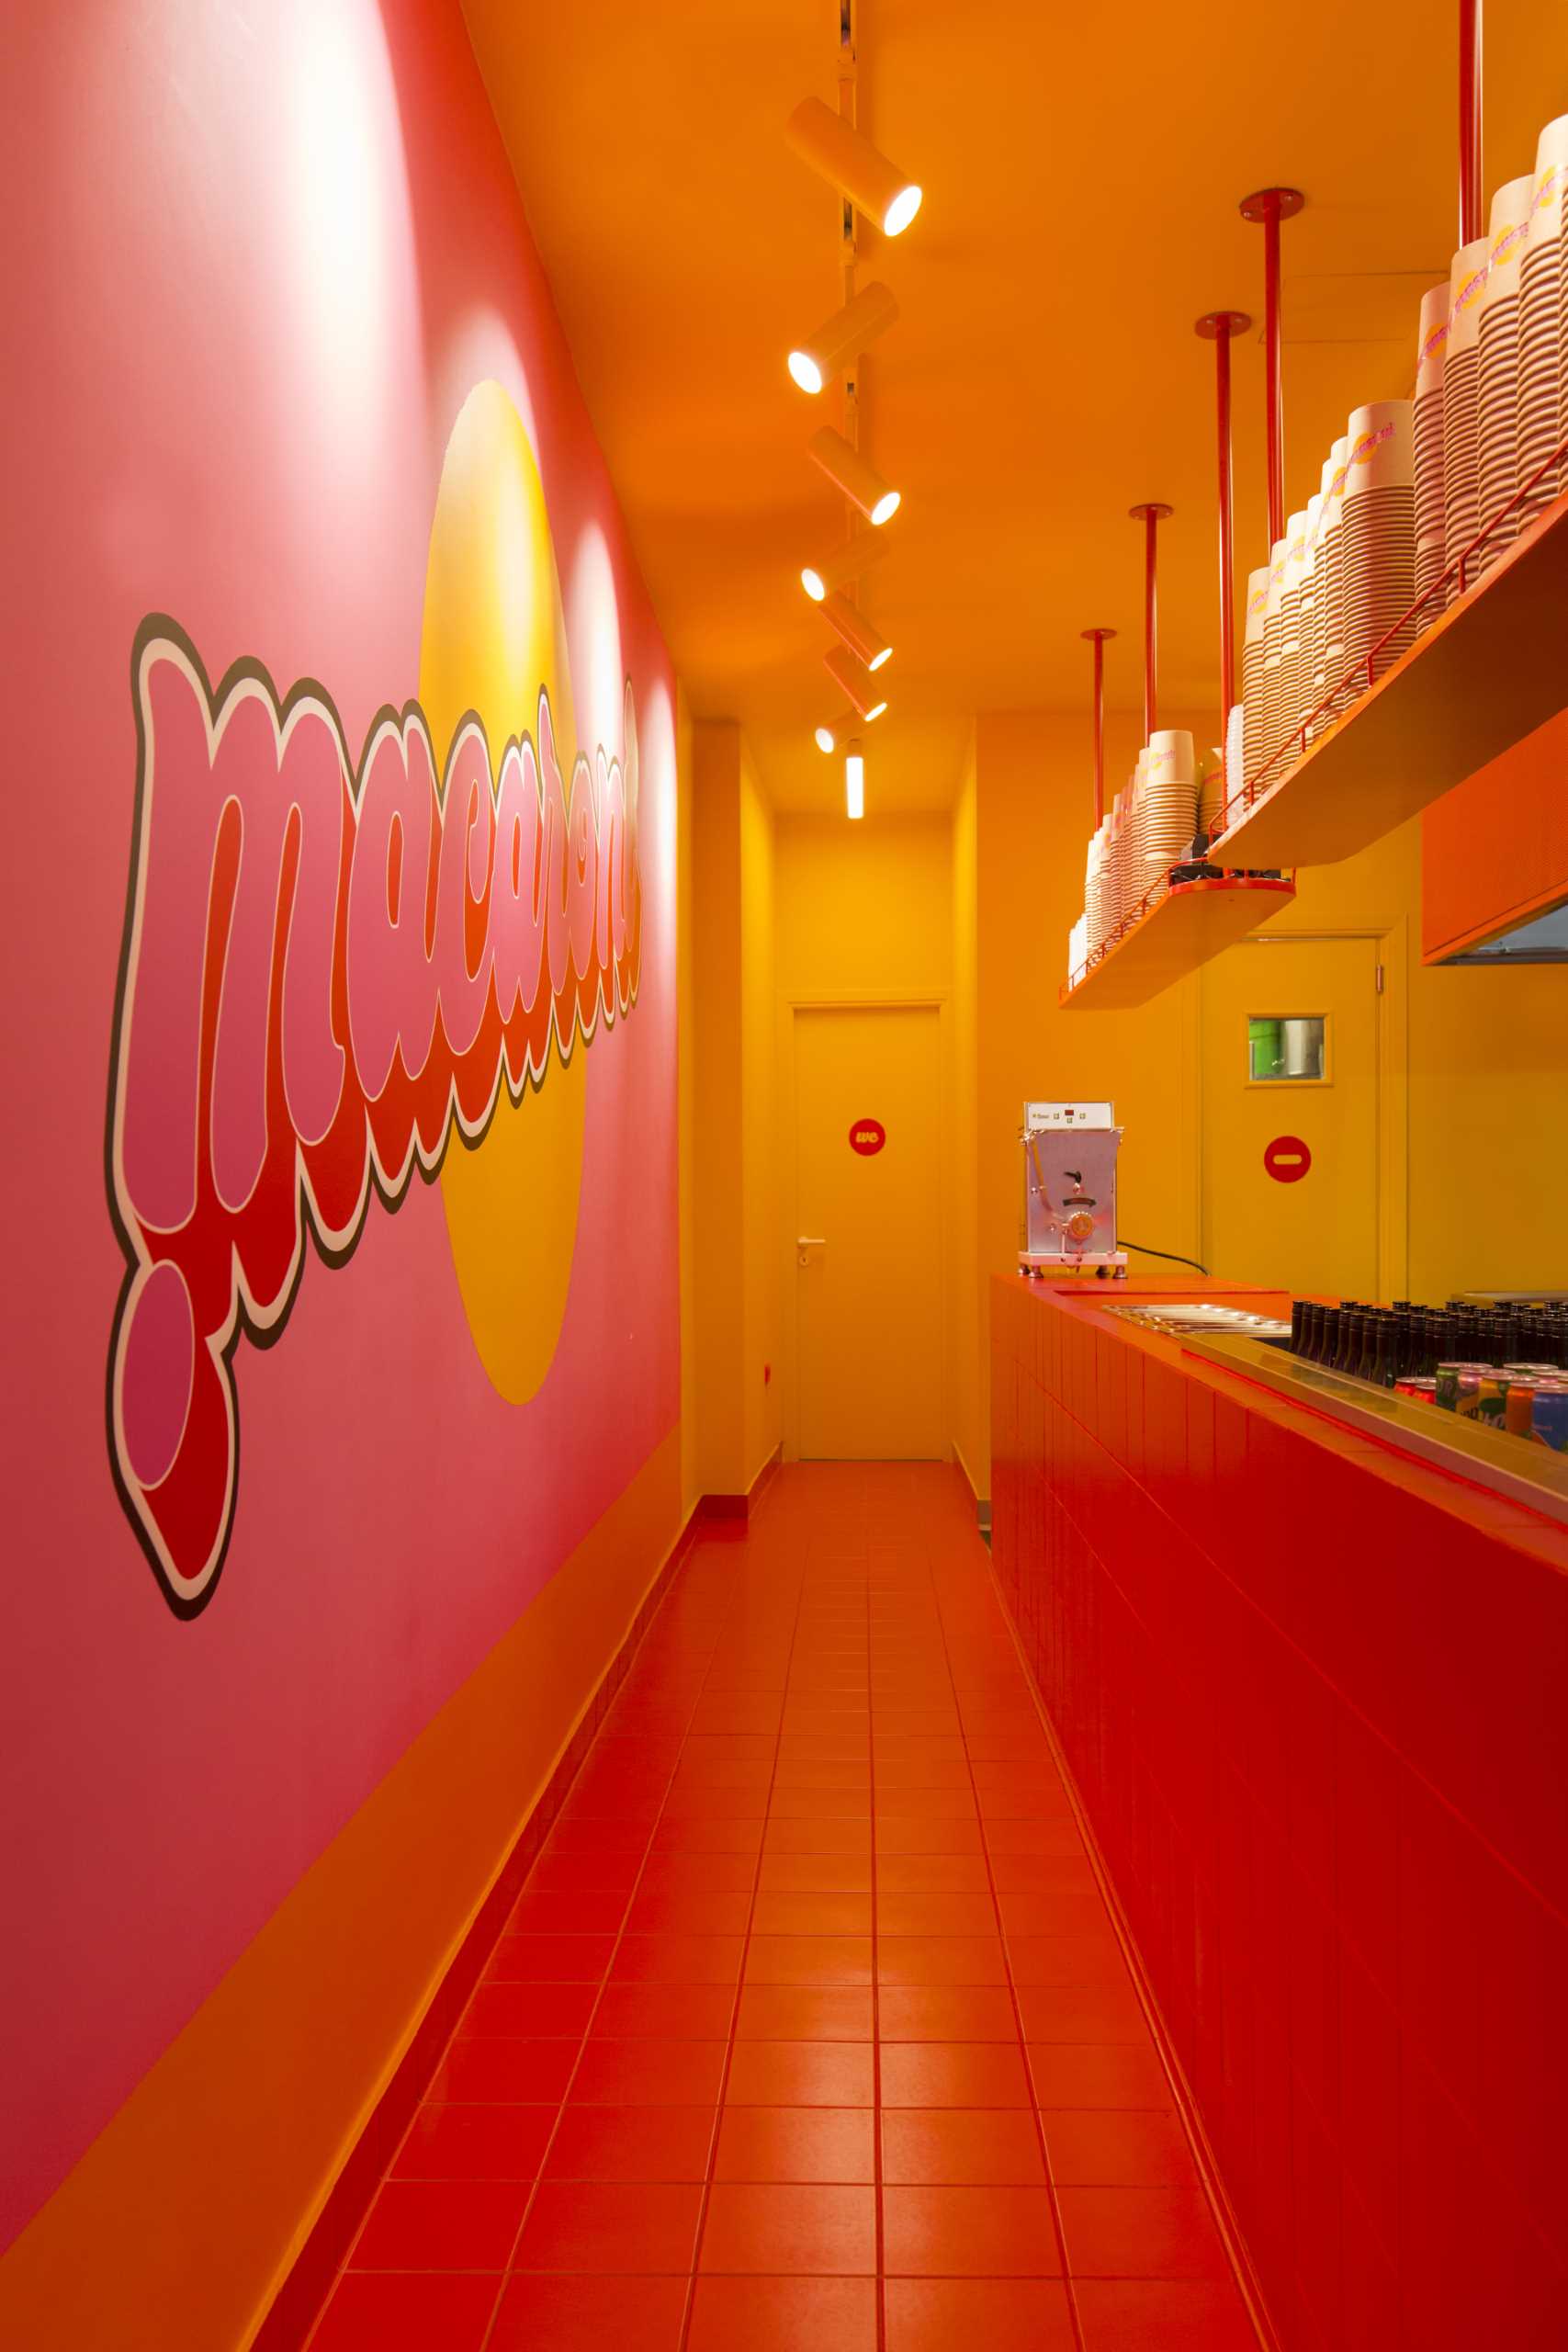 Upon entering this pasta shop, the customer faces the counter and has a full view of the open kitchen. The playful combo of red, pink, and orange colors turns this limited space into a vibrant, funky area.